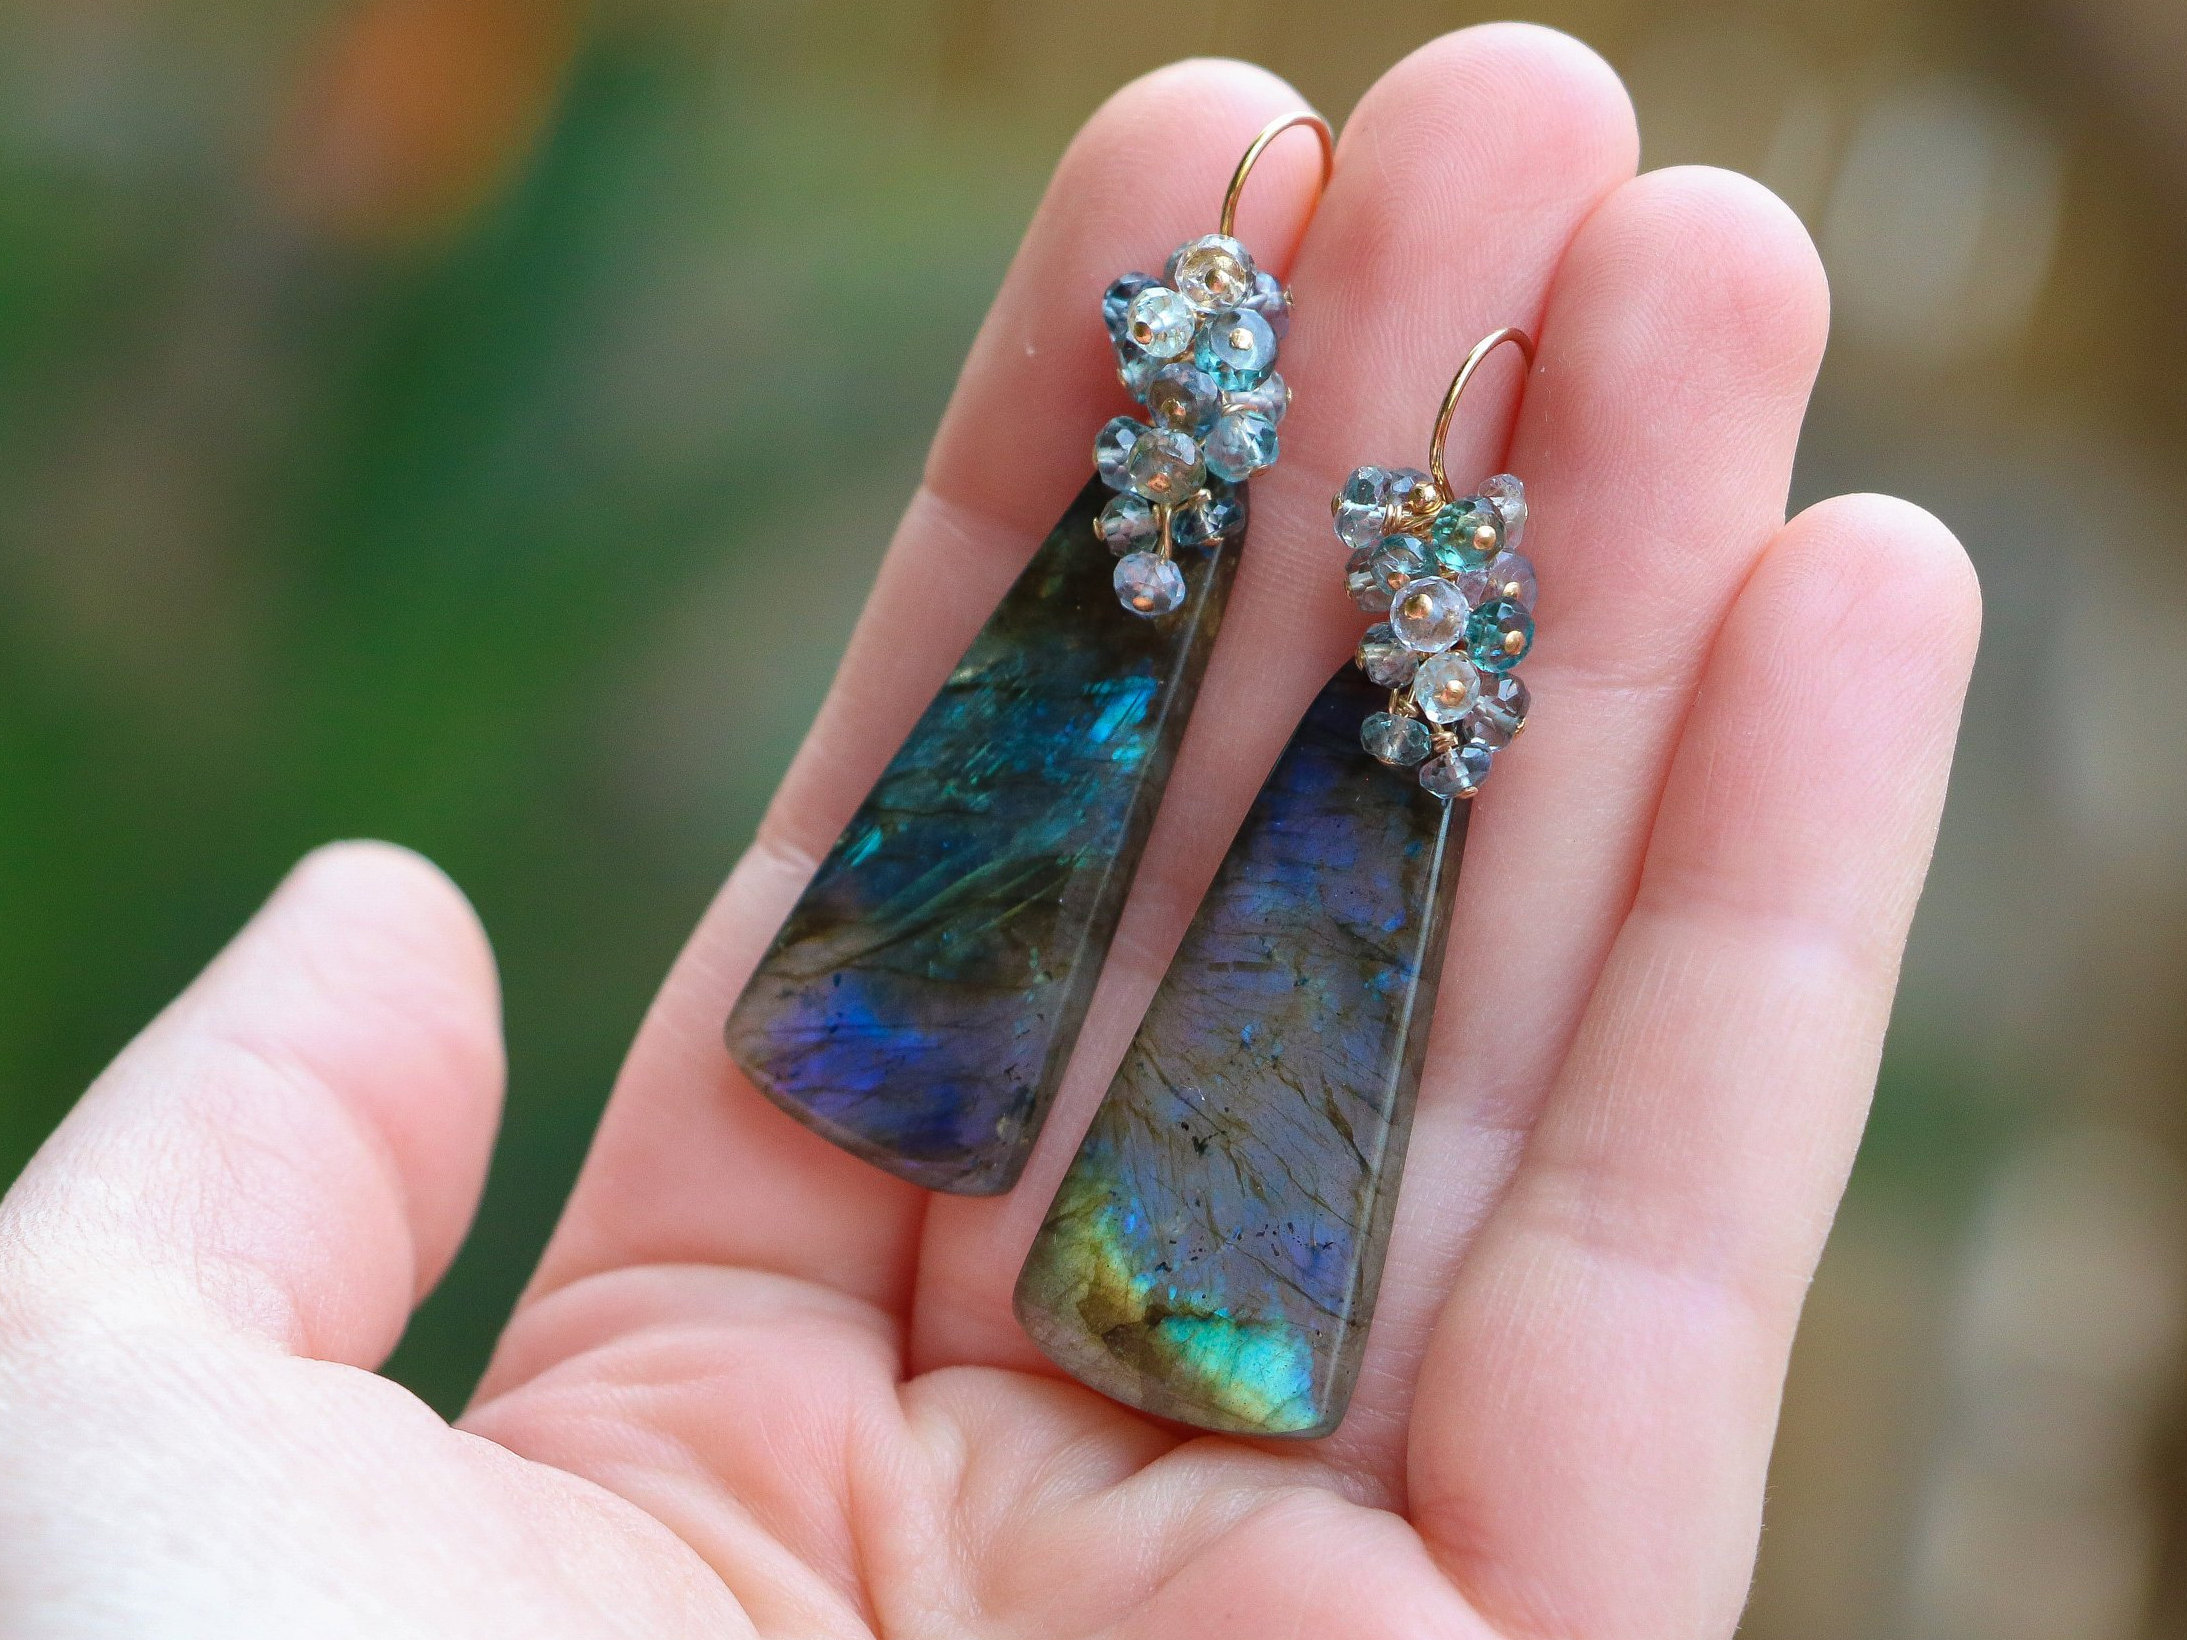 Large Labradorite Earrings with Blue Spinel, Gemstone Earrings in 14K Gold Filled, One of a Kind